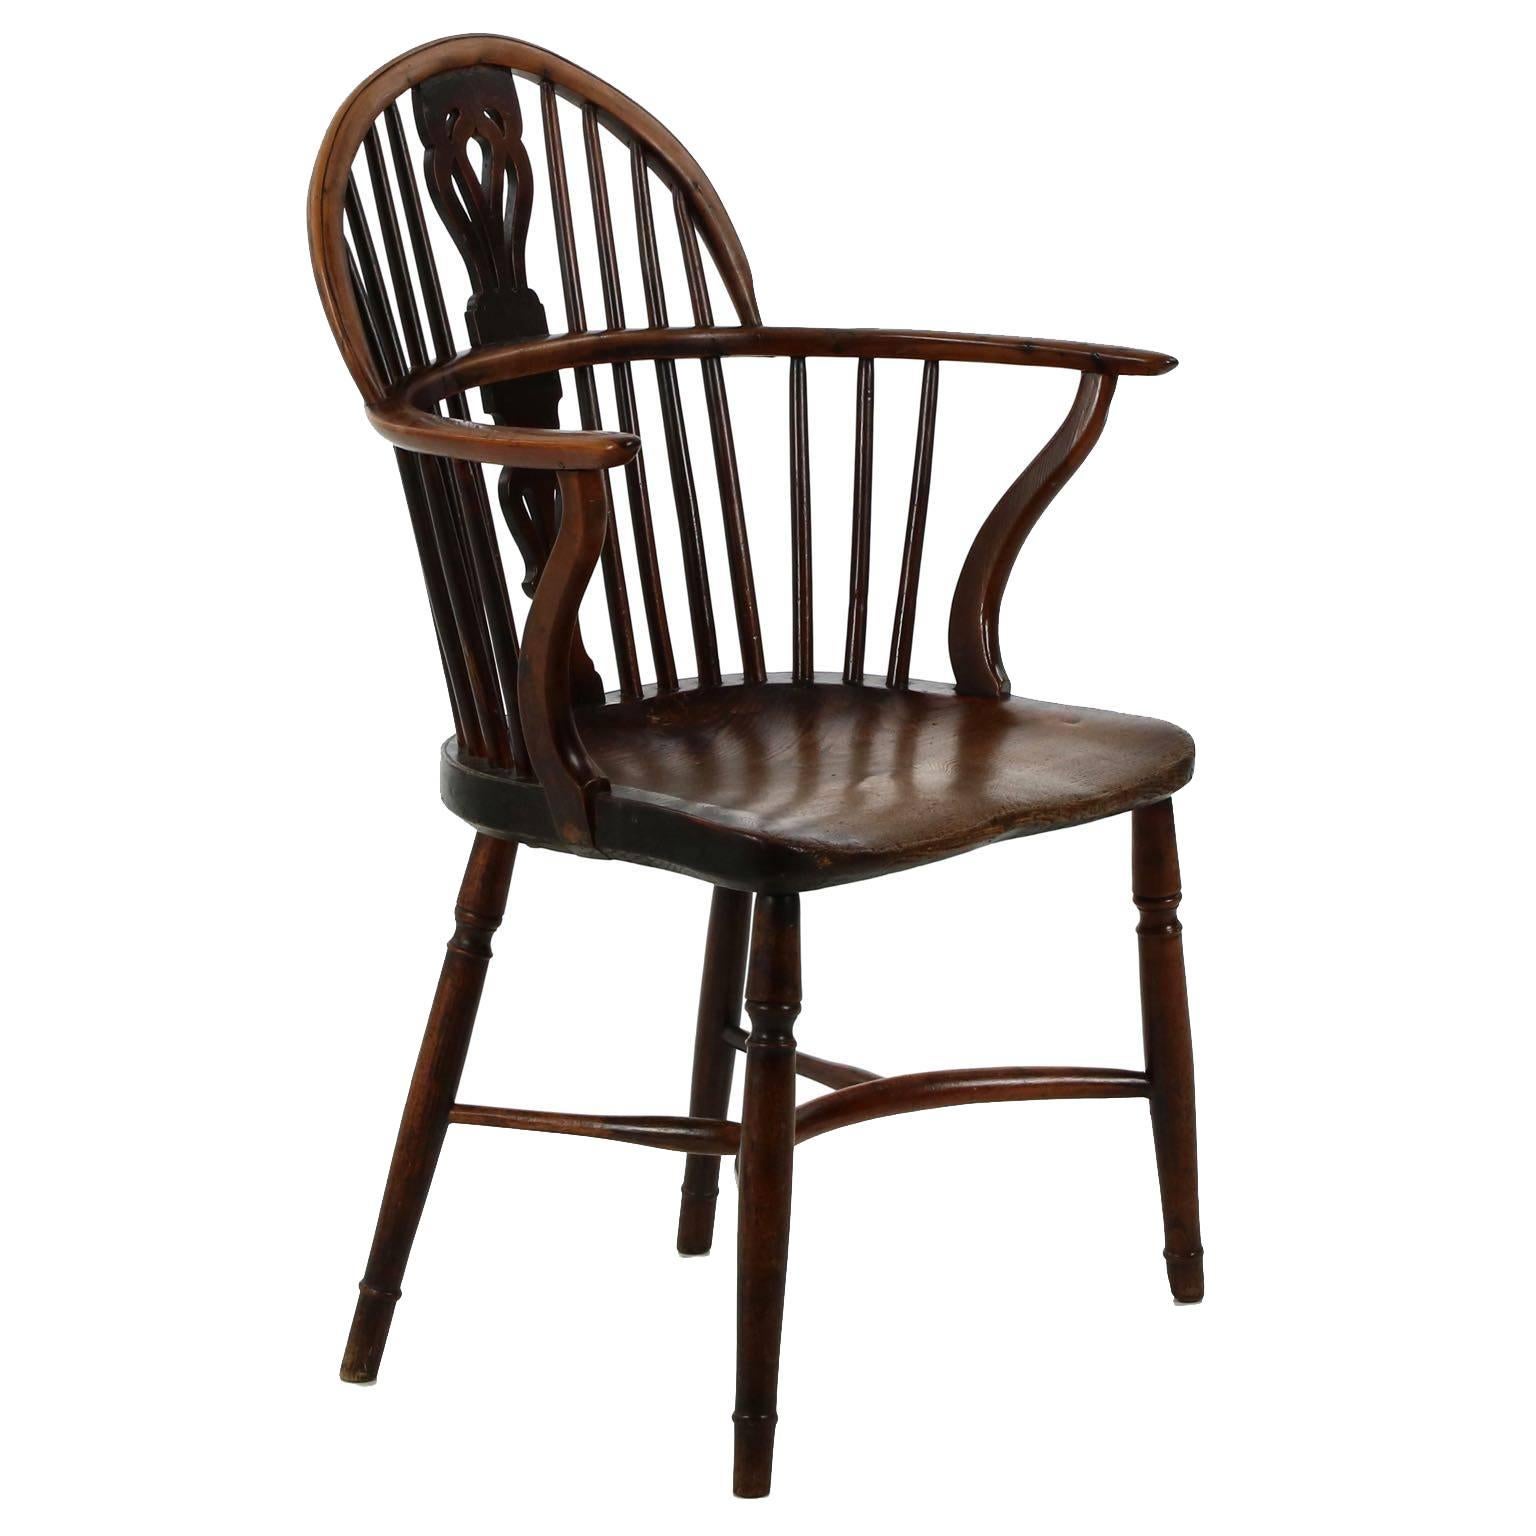 Fine English Yew and Elm Antique Windsor Armchair, circa 1810-1840